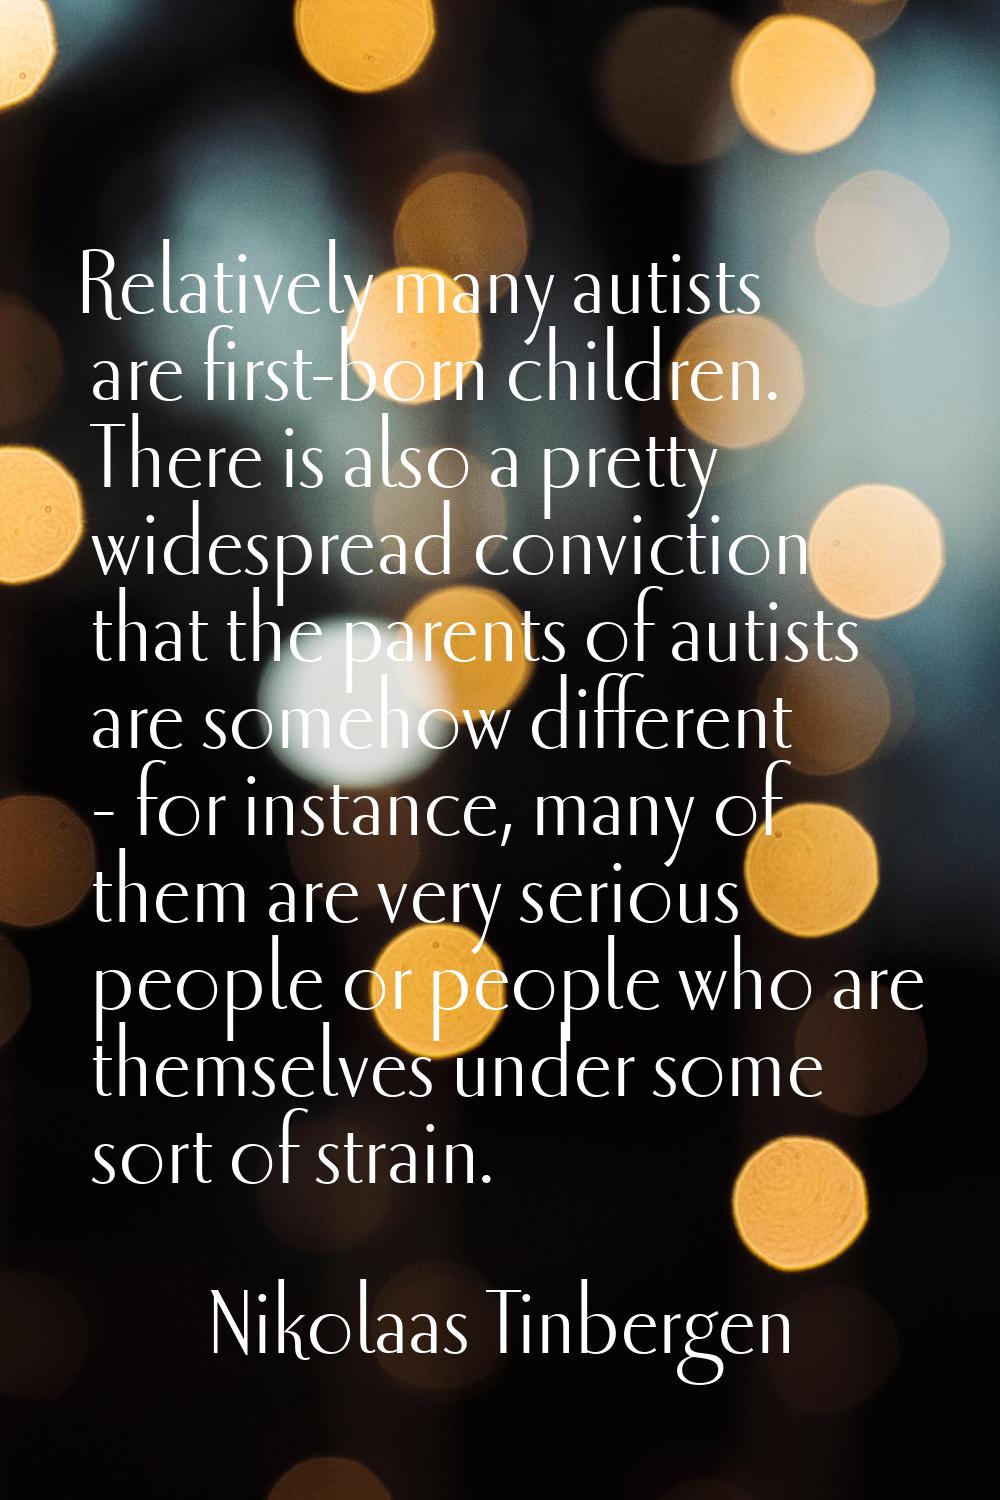 Relatively many autists are first-born children. There is also a pretty widespread conviction that 